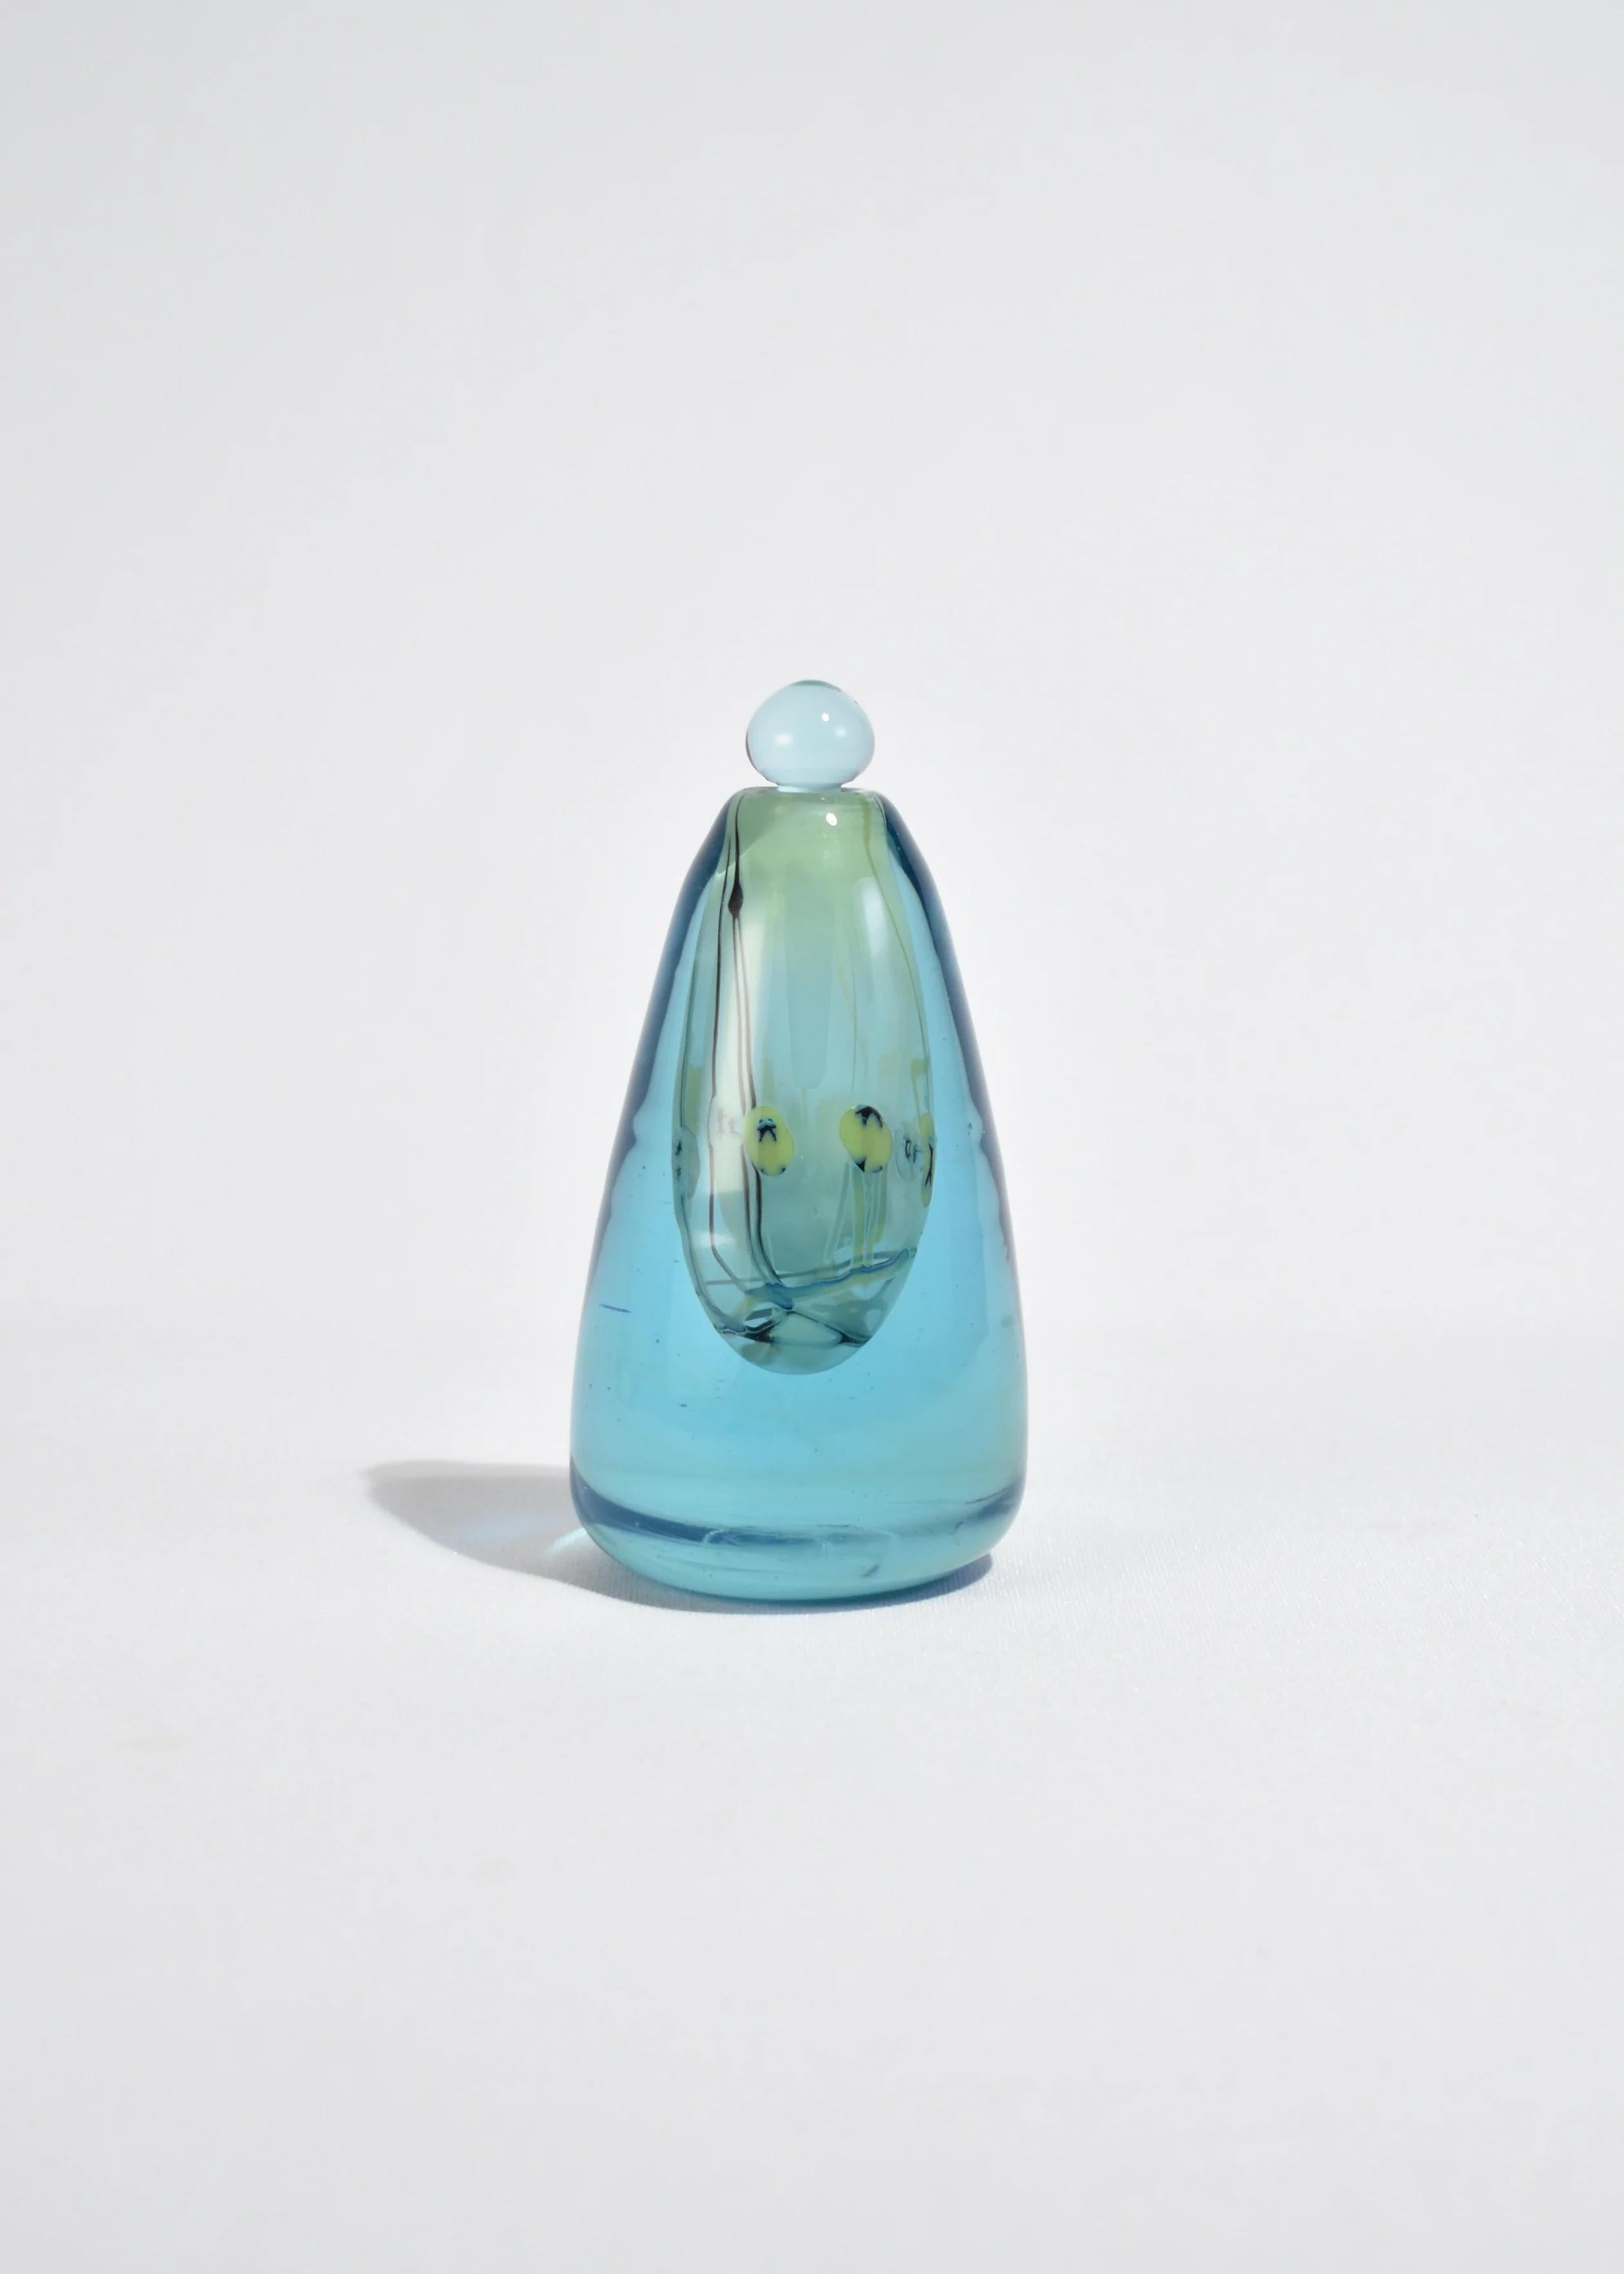 Hand-Crafted Blue Glass Perfume Bottle